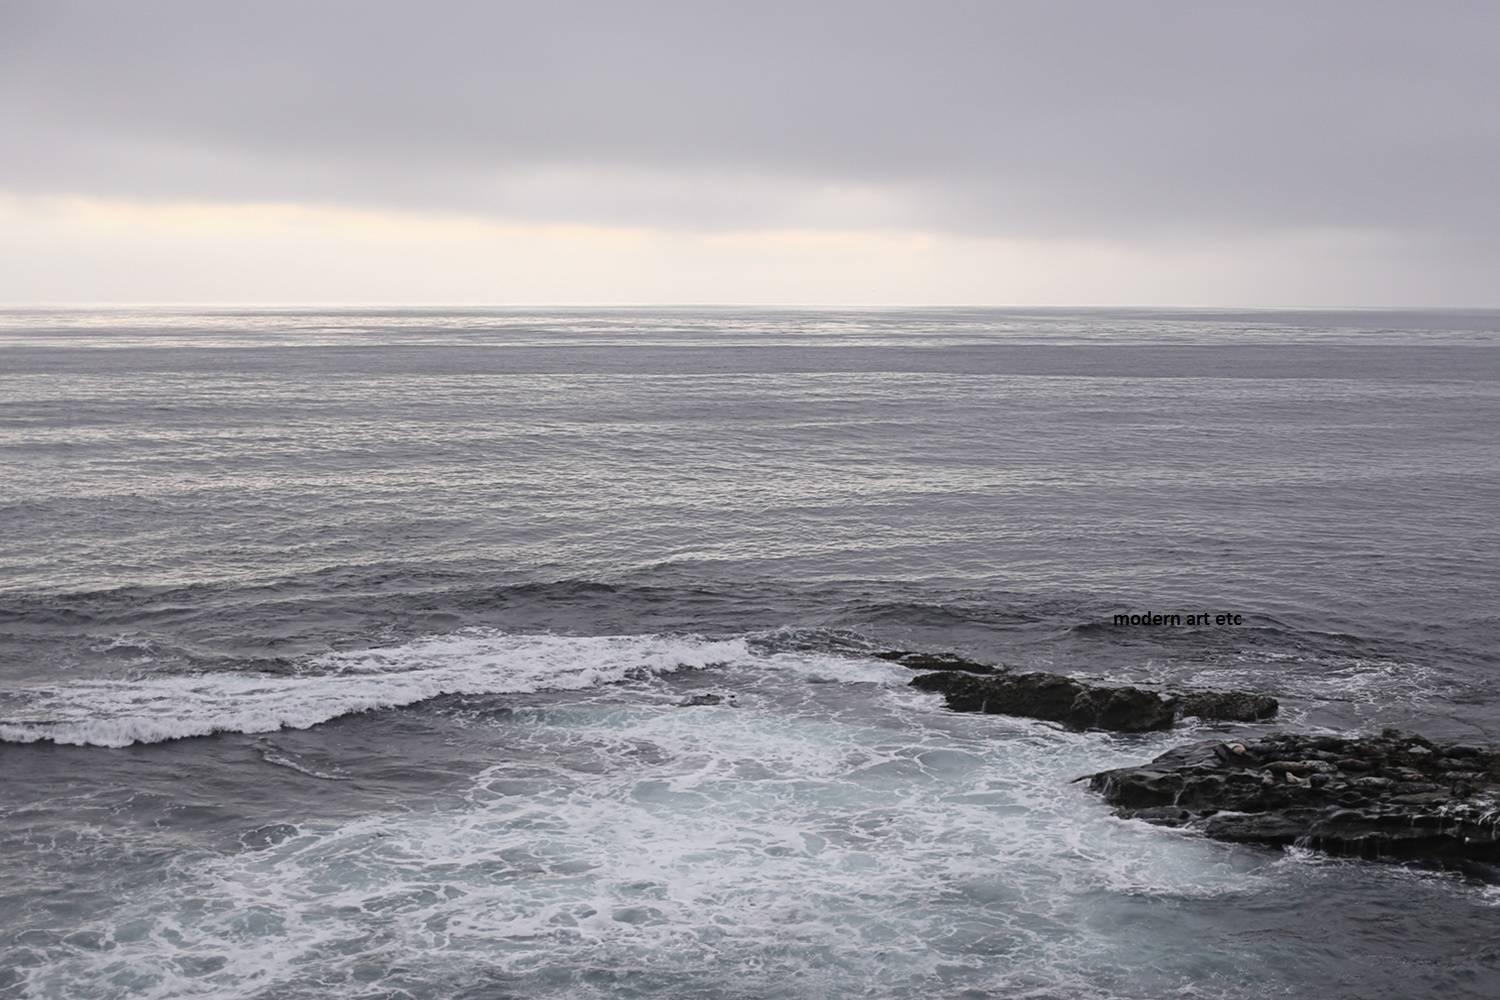 Californian Coast, Pacific Ocean photography unframed No. 2 - Photograph by MAE Curates